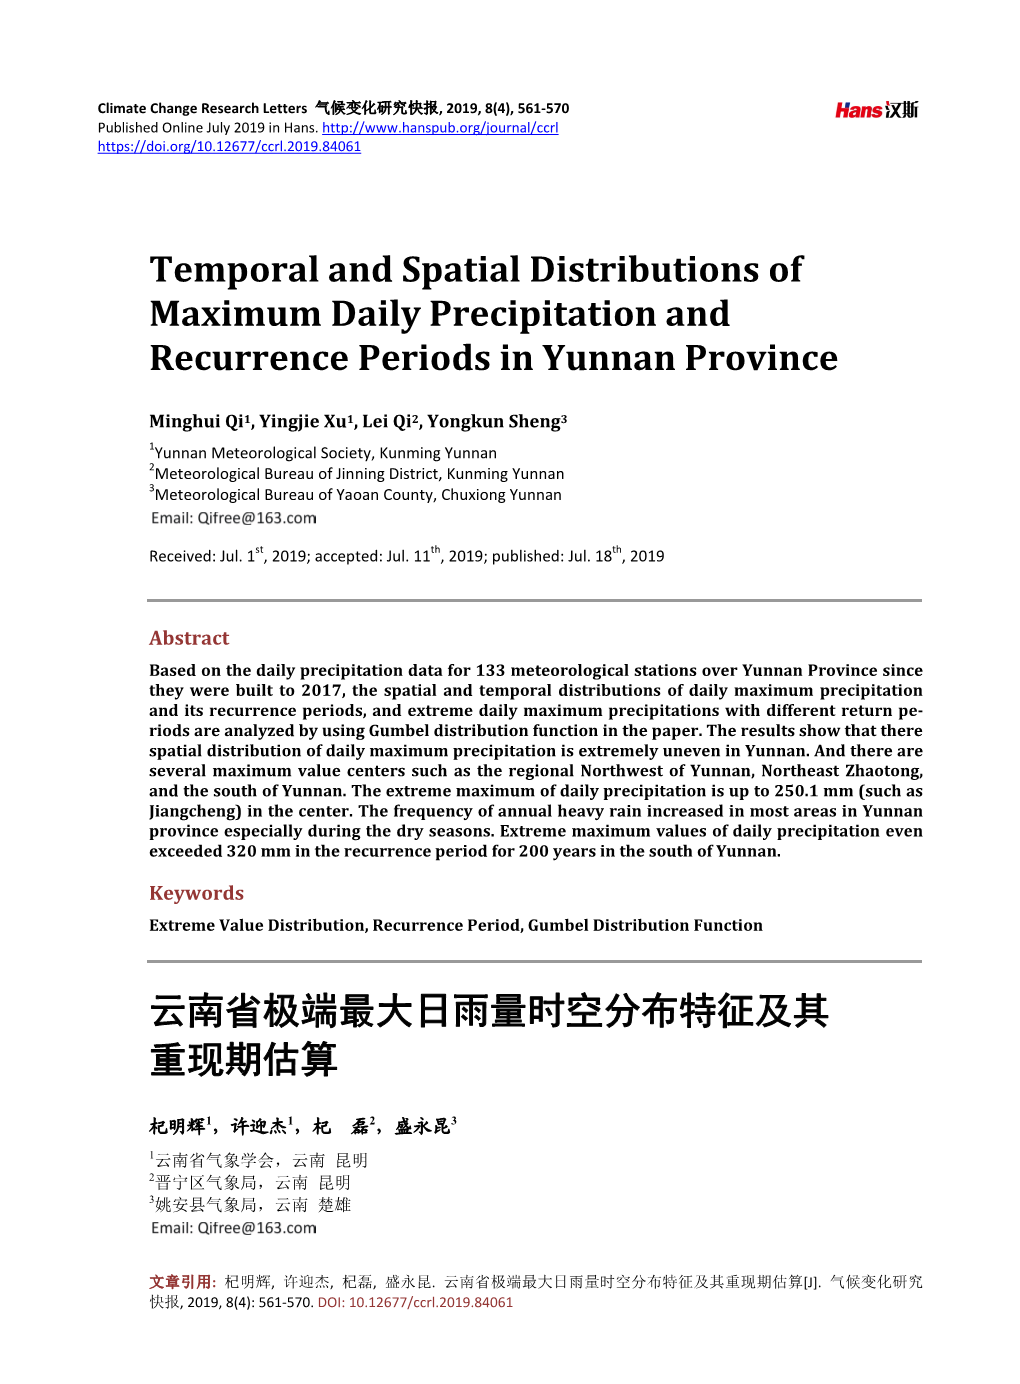 Temporal and Spatial Distributions of Maximum Daily Precipitation and Recurrence Periods in Yunnan Province